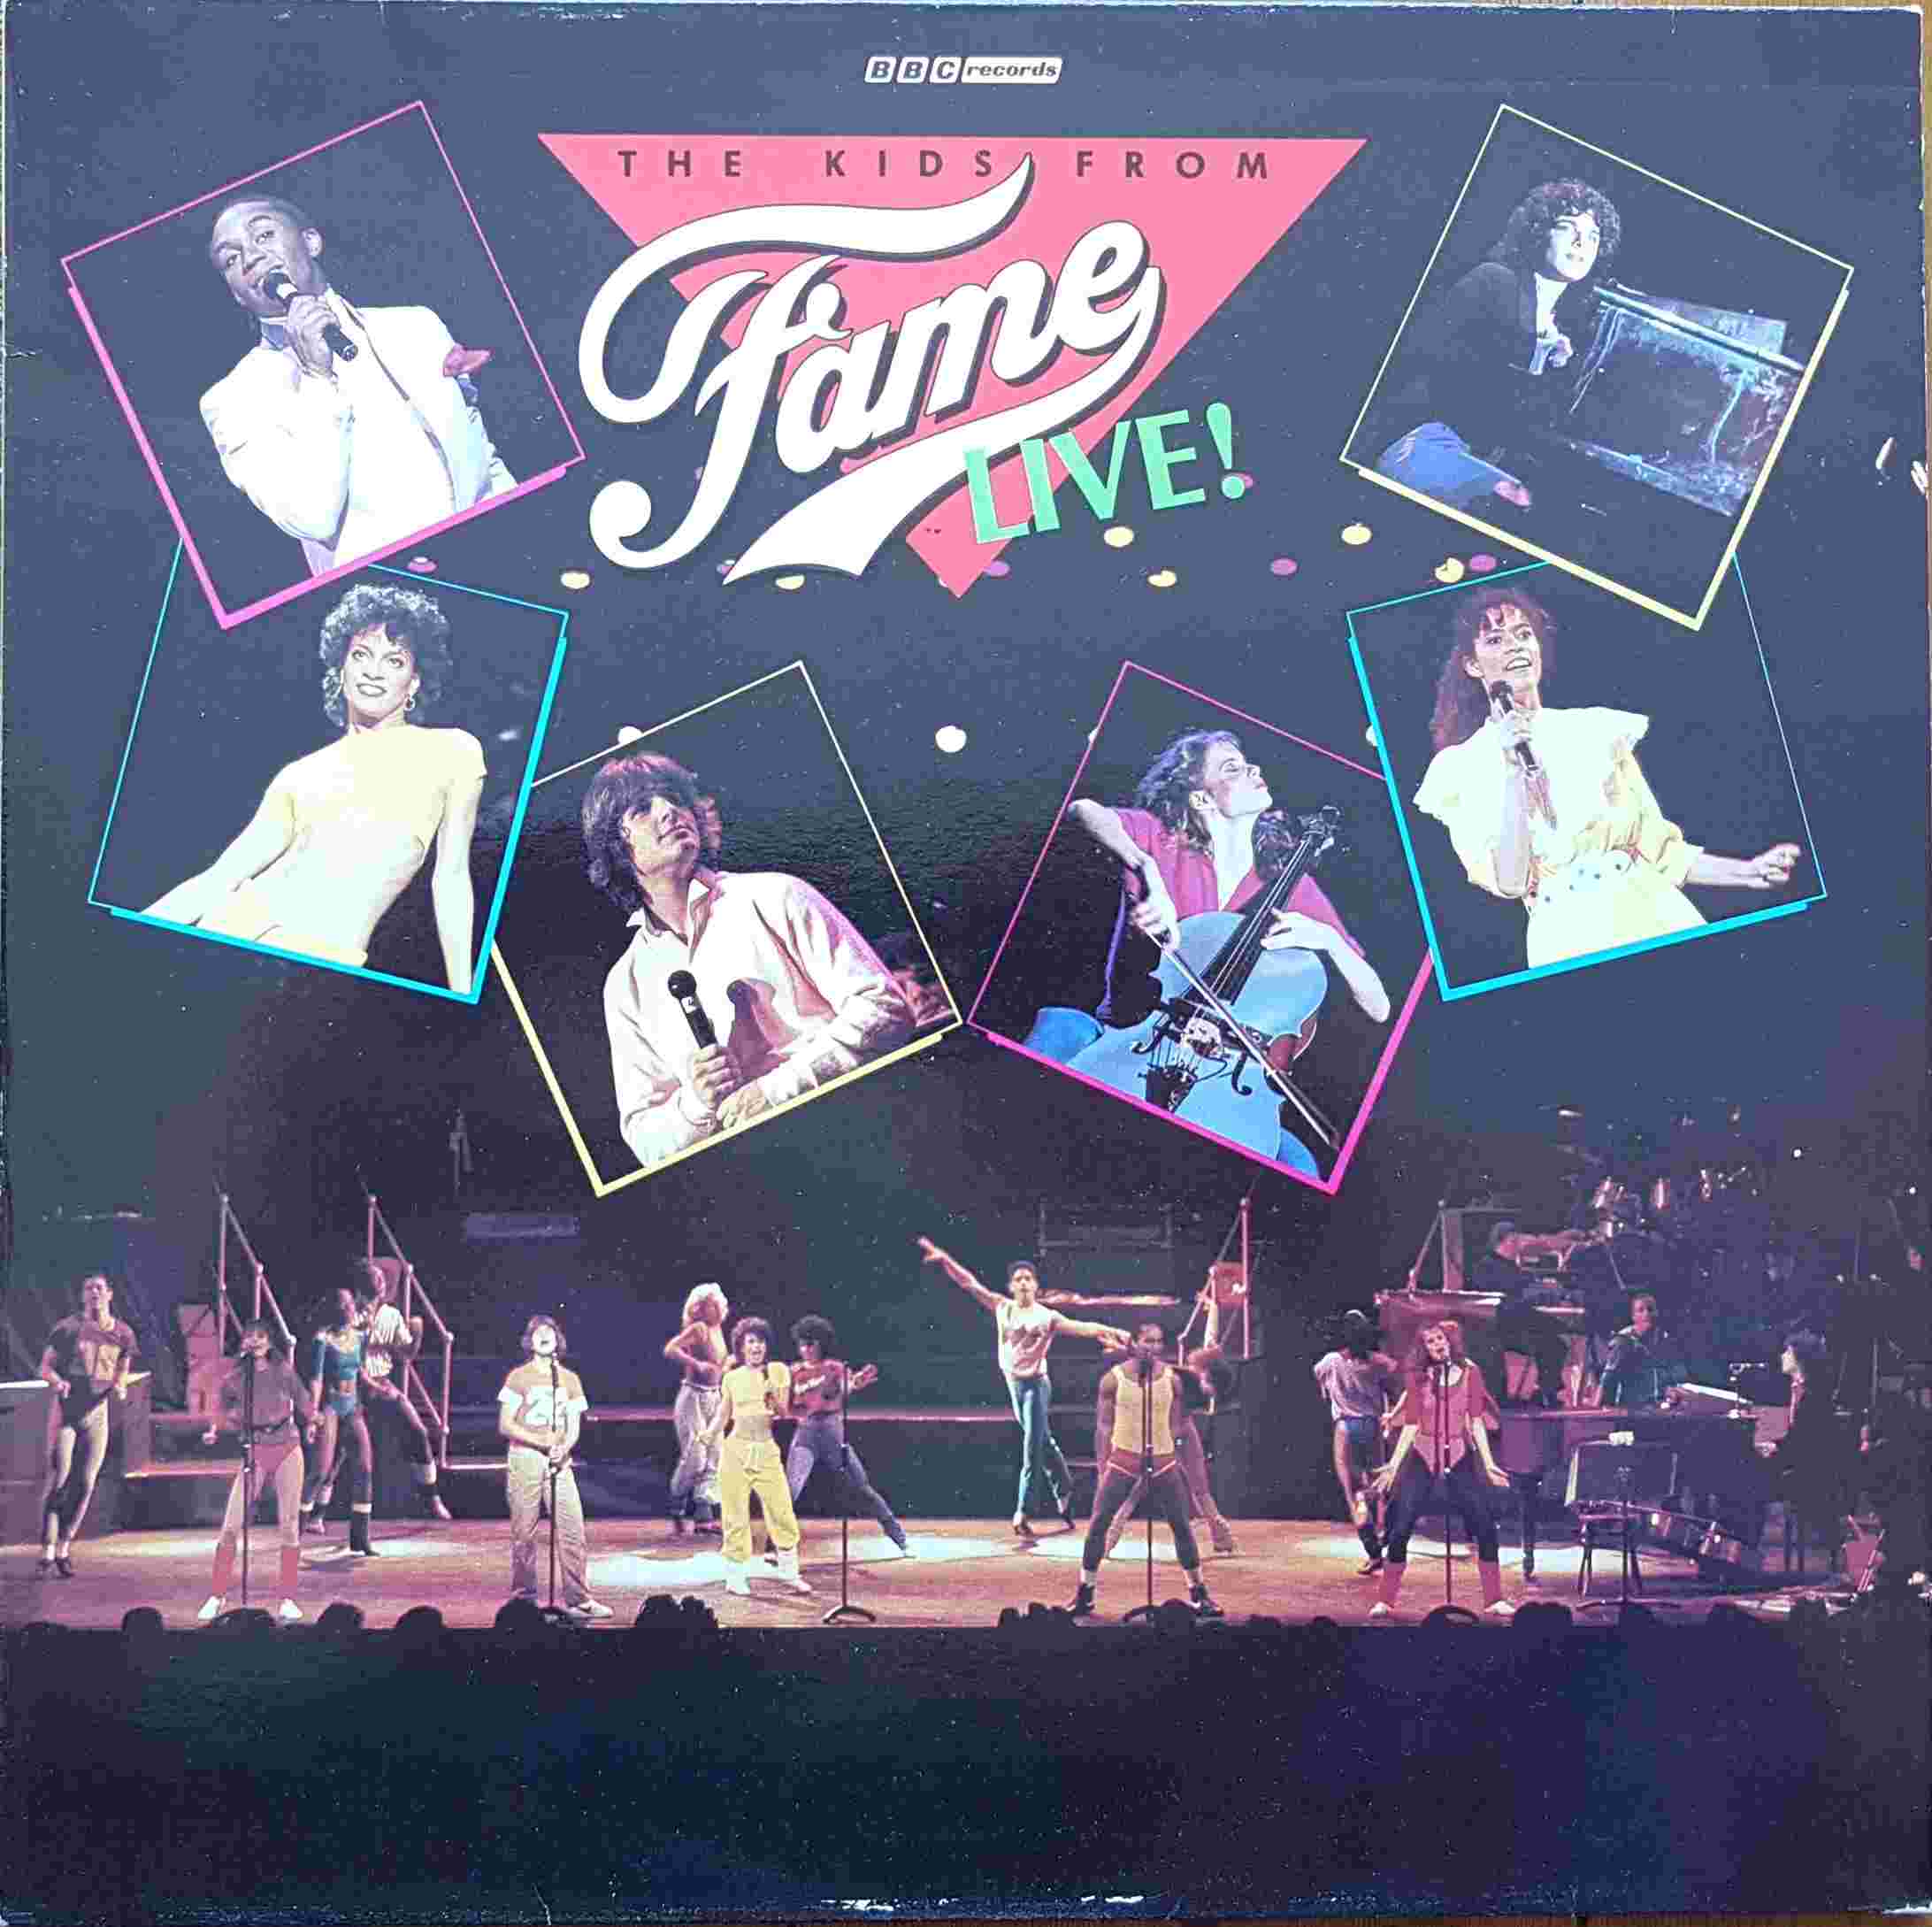 Picture of The kids from fame - Live by artist Various from the BBC albums - Records and Tapes library